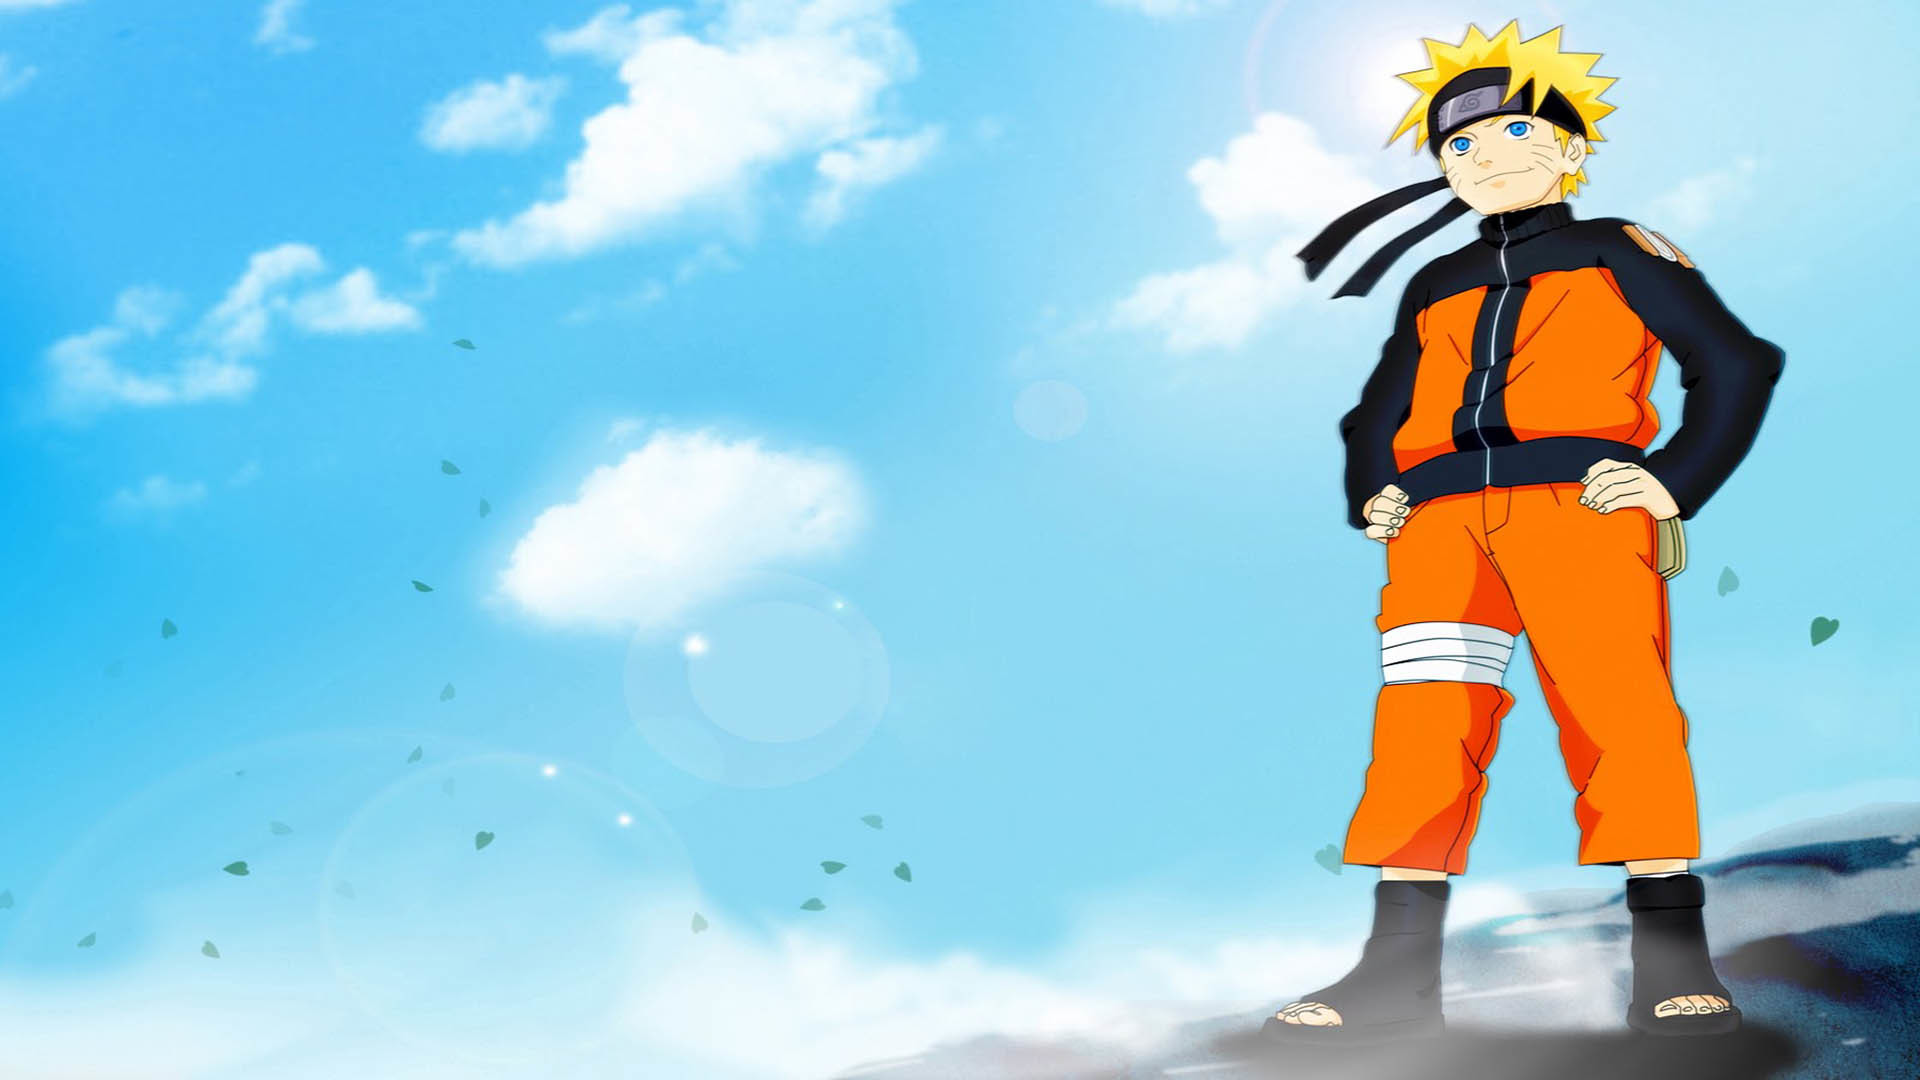 Naruto Wallpaper HD 73 pictures  Hd anime wallpapers Naruto wallpaper  Amazing hd wallpapers